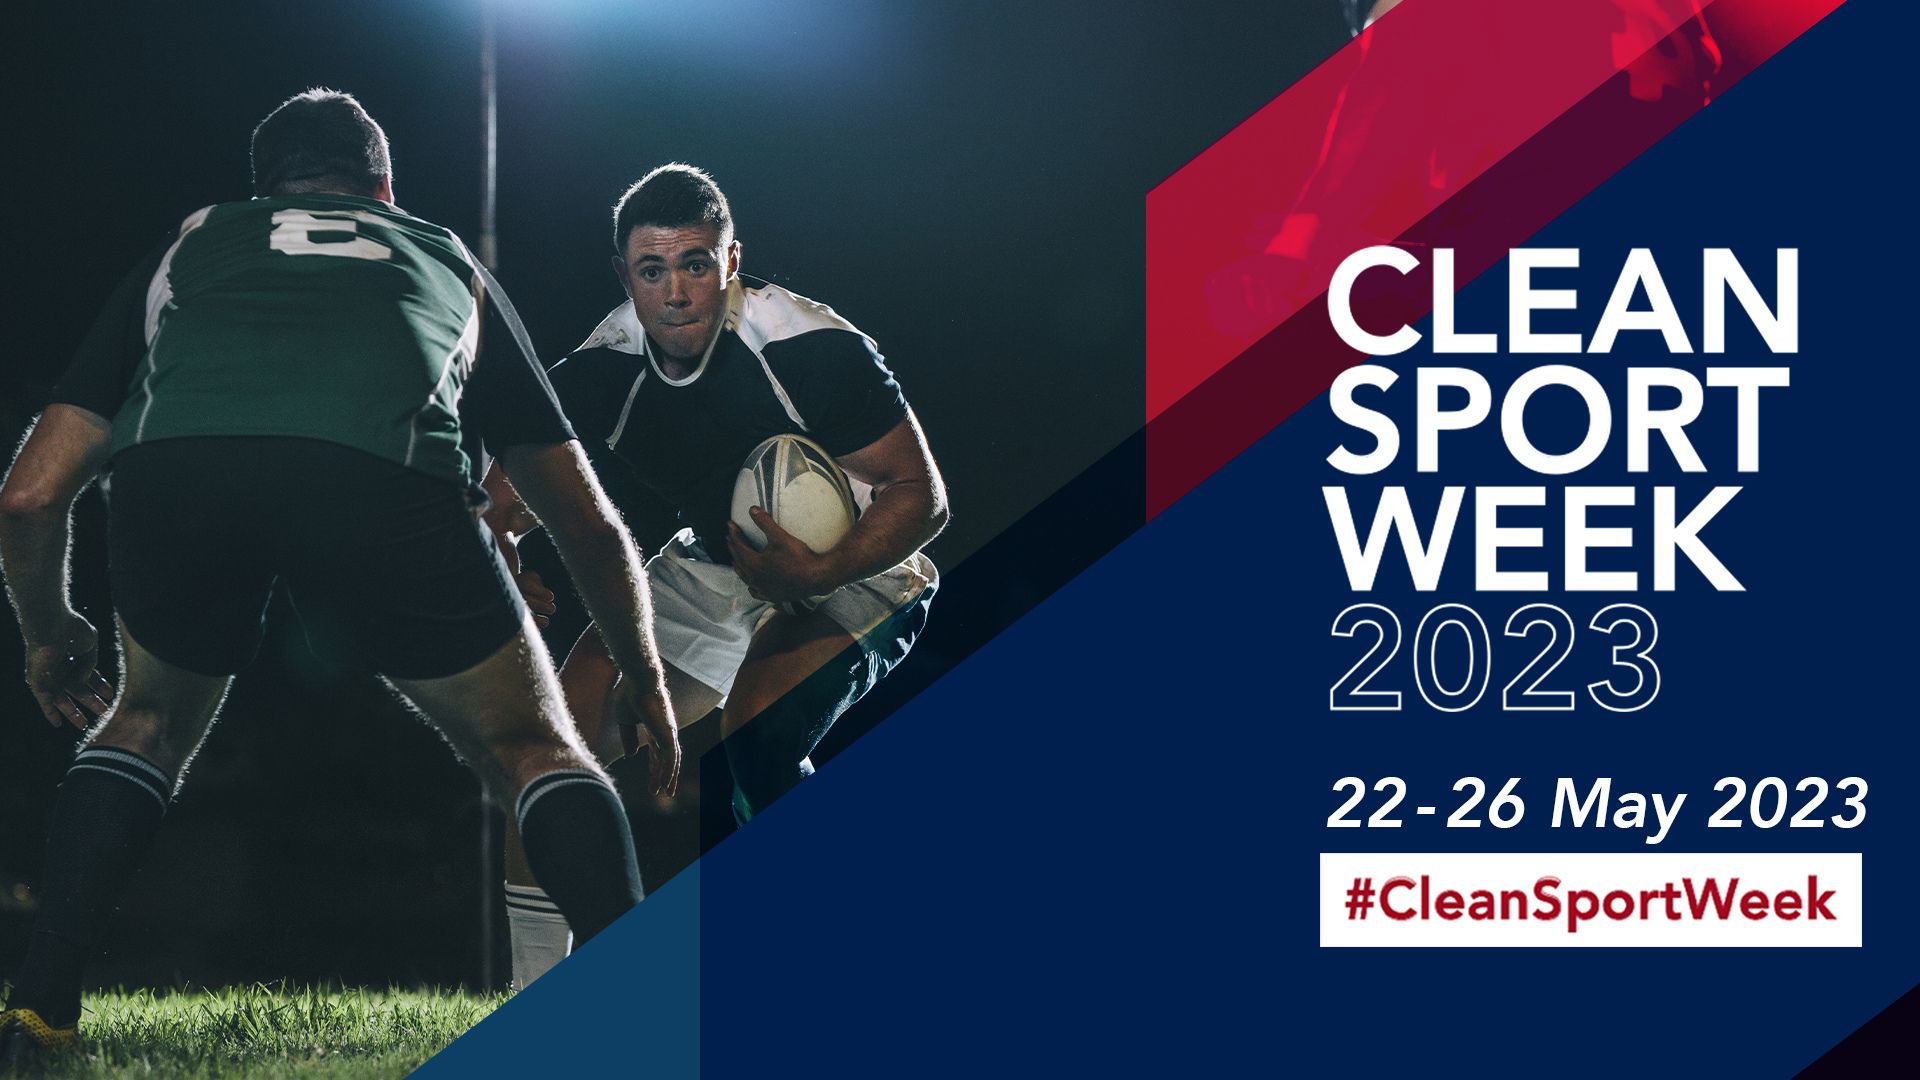 An image of rugby players with text overlay reading; Clean Sport Week 2023, 22-26 May 2023 #CleamSportWeek